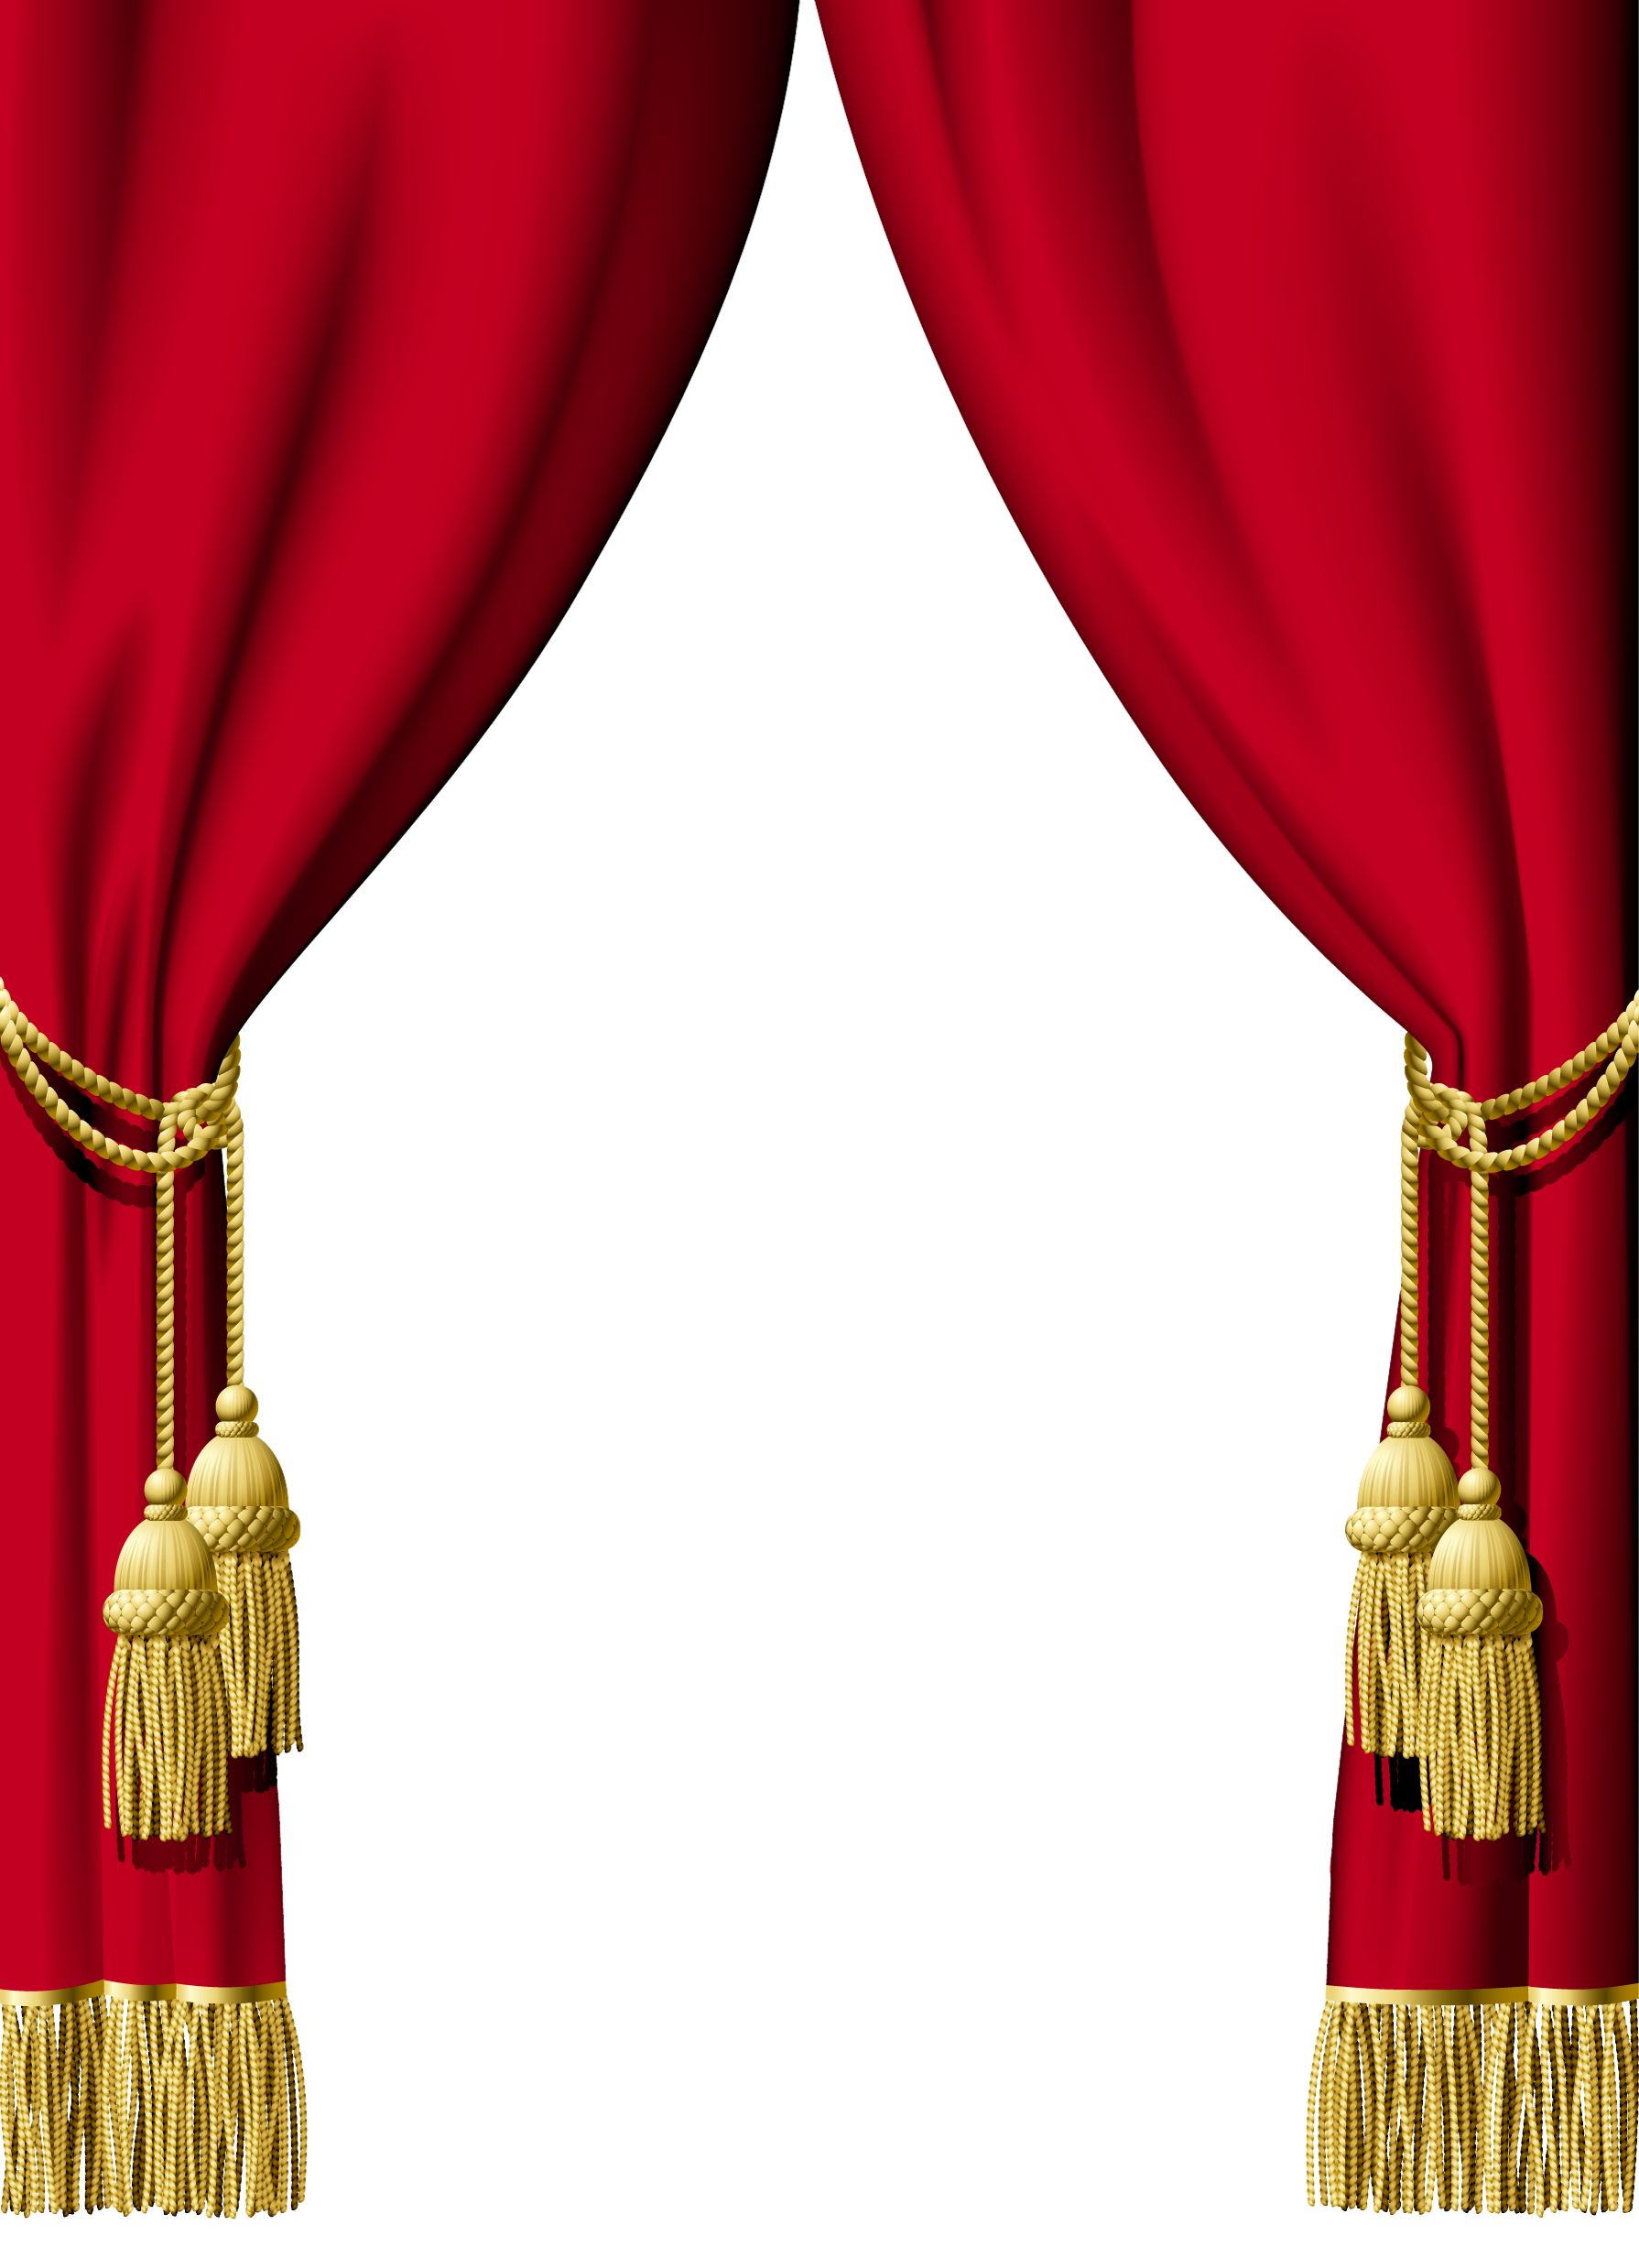 Theater stage red curtains re